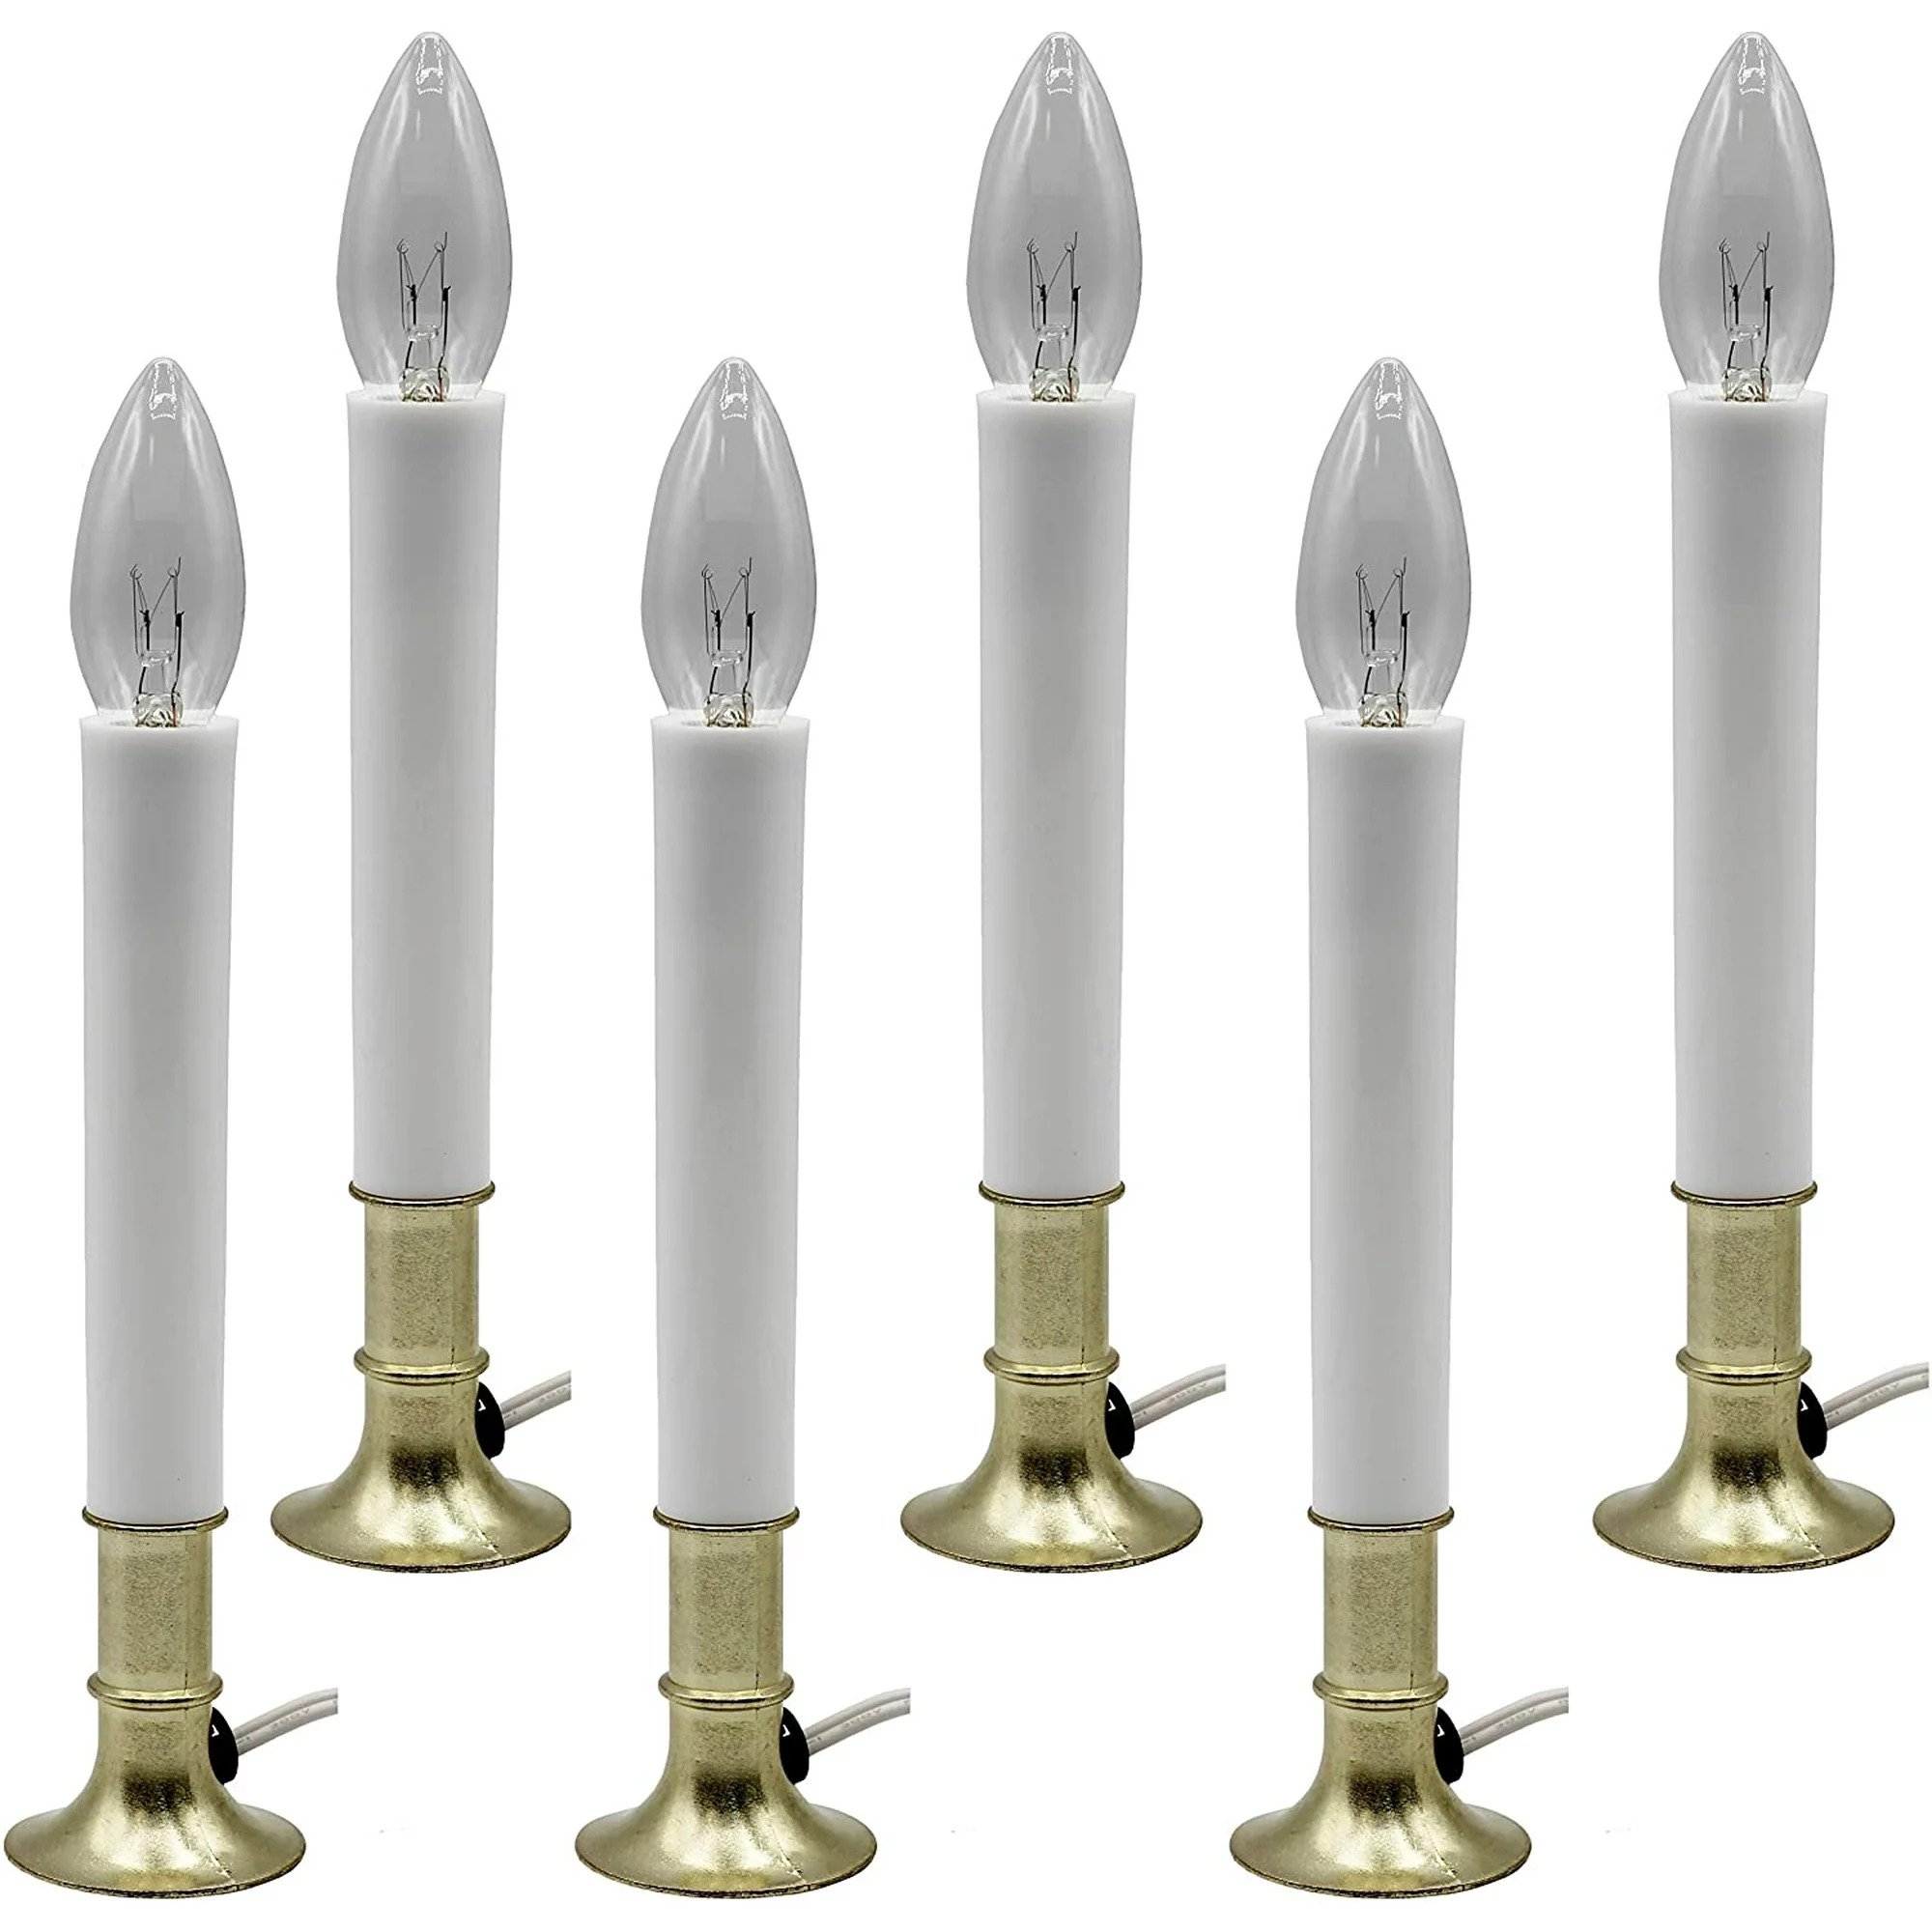 15 Best Window Candles With Sensor Dusk To Dawn for 2023